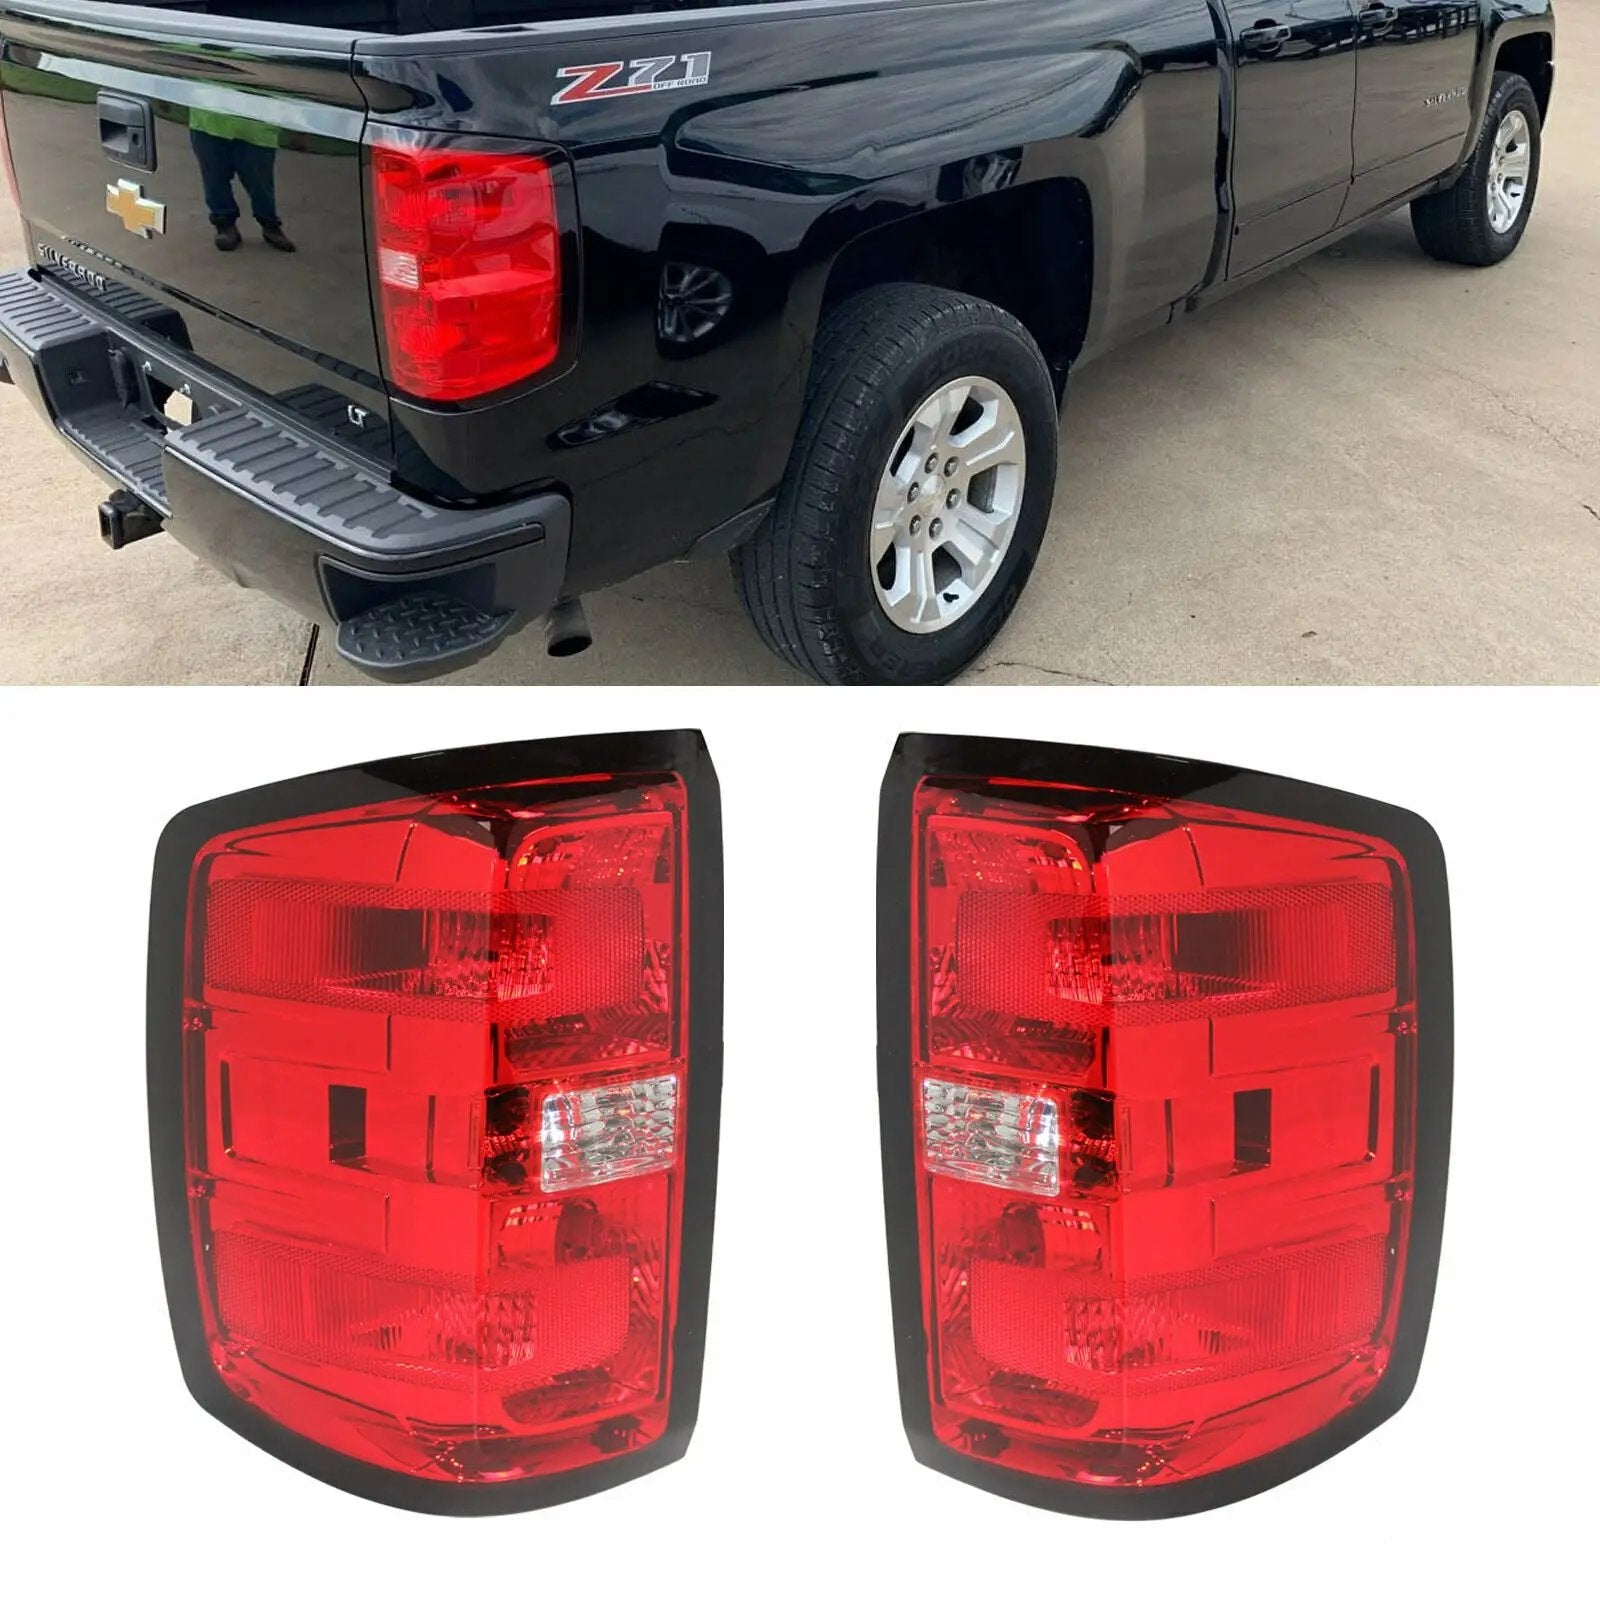 Red Tail Lights Brake Lamps for 2014-2018 Chevy Silverado 1500 2500 3500 HD